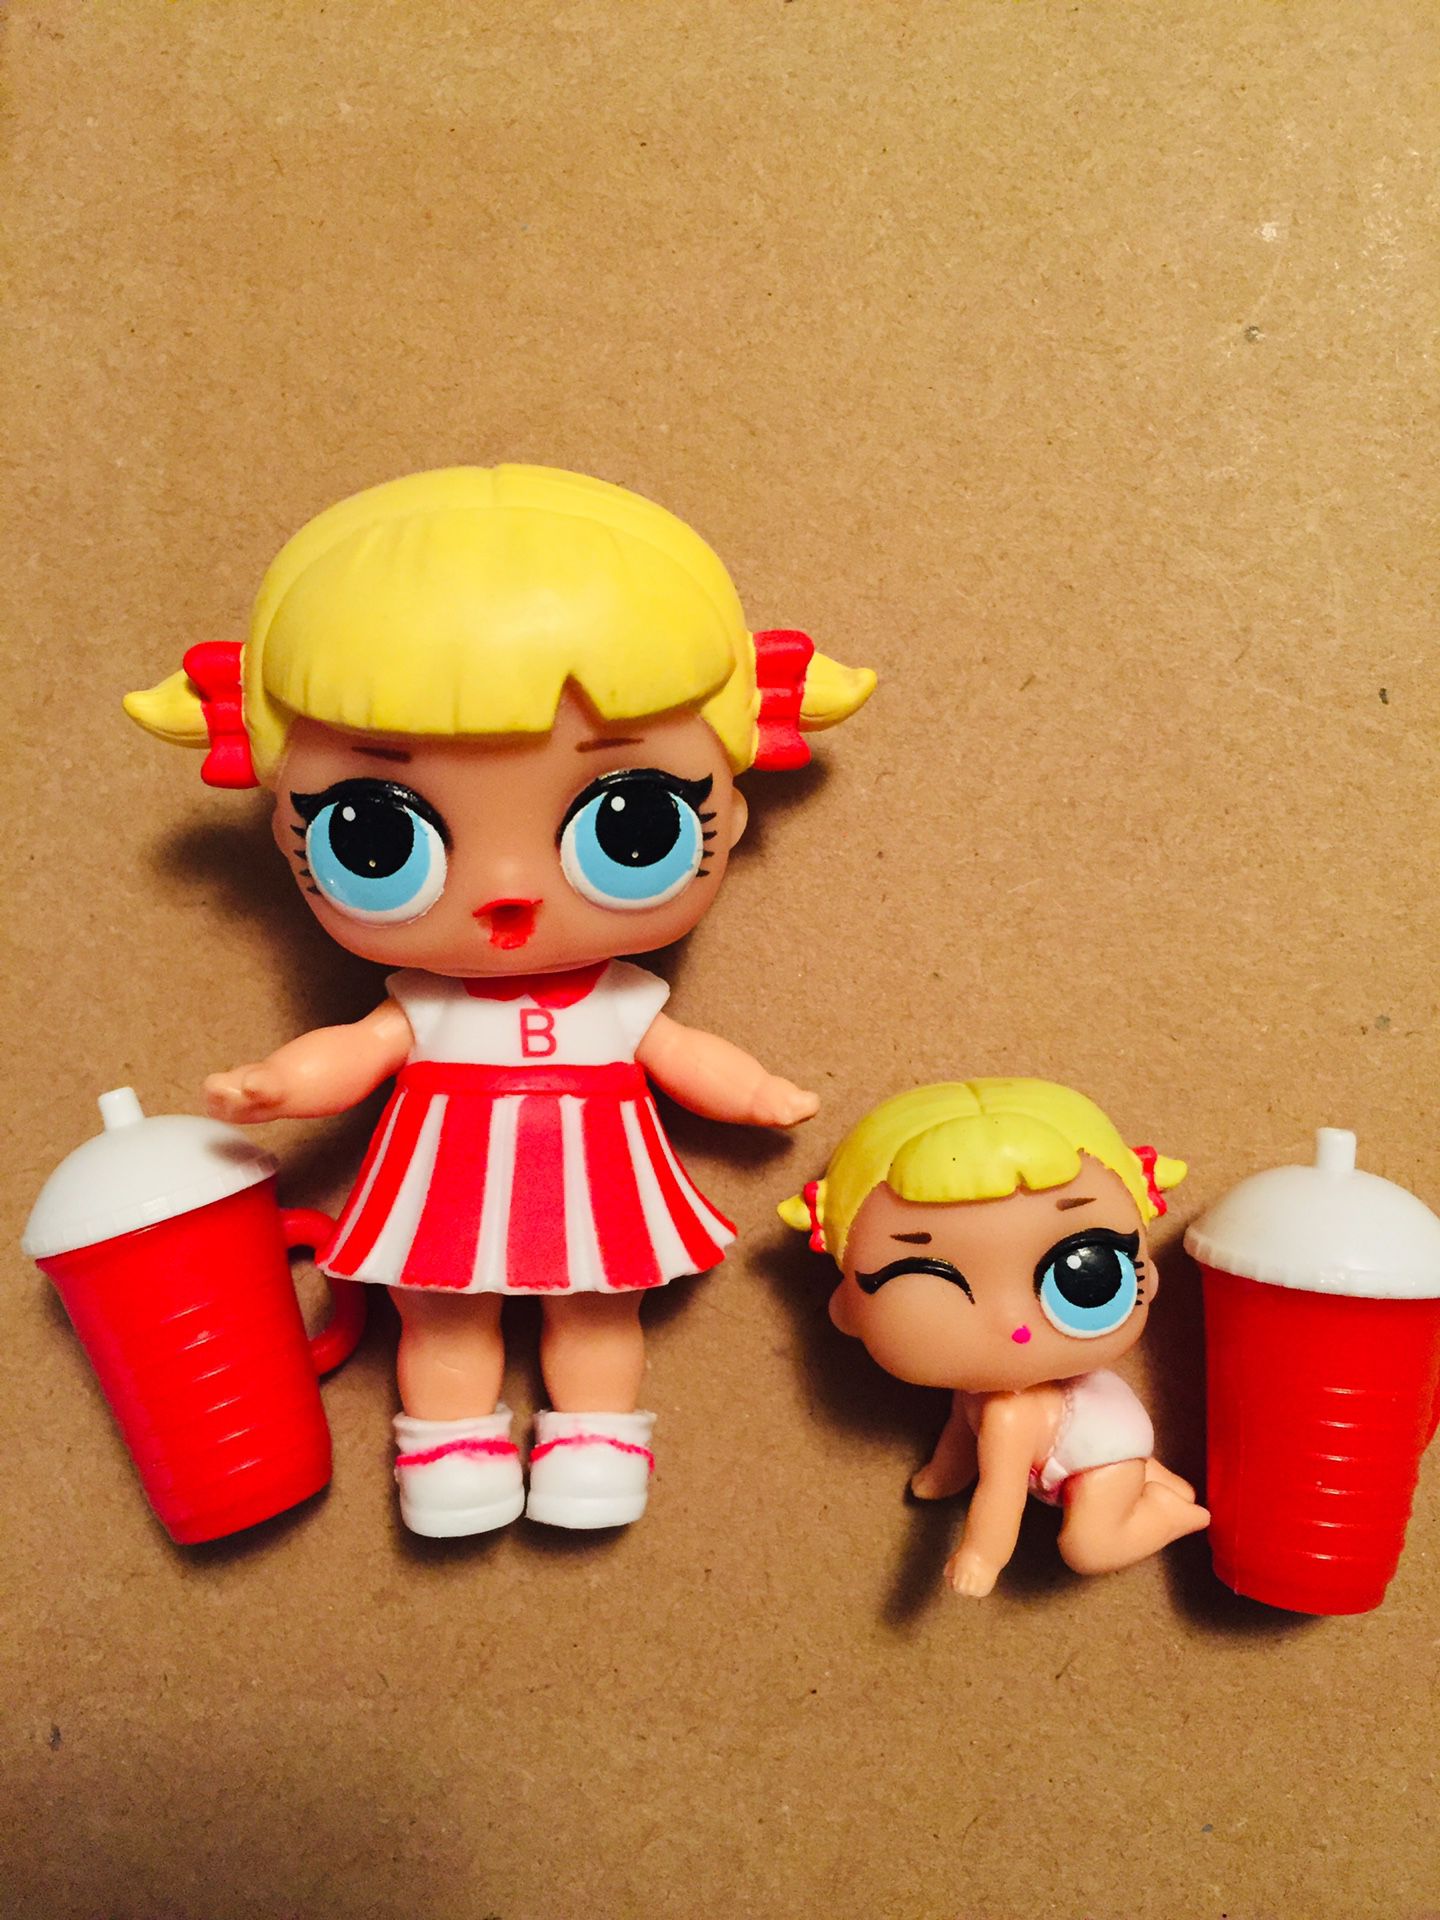 Cheer Captain, lil Cheer captain, & other lol Surprise Dolls requested